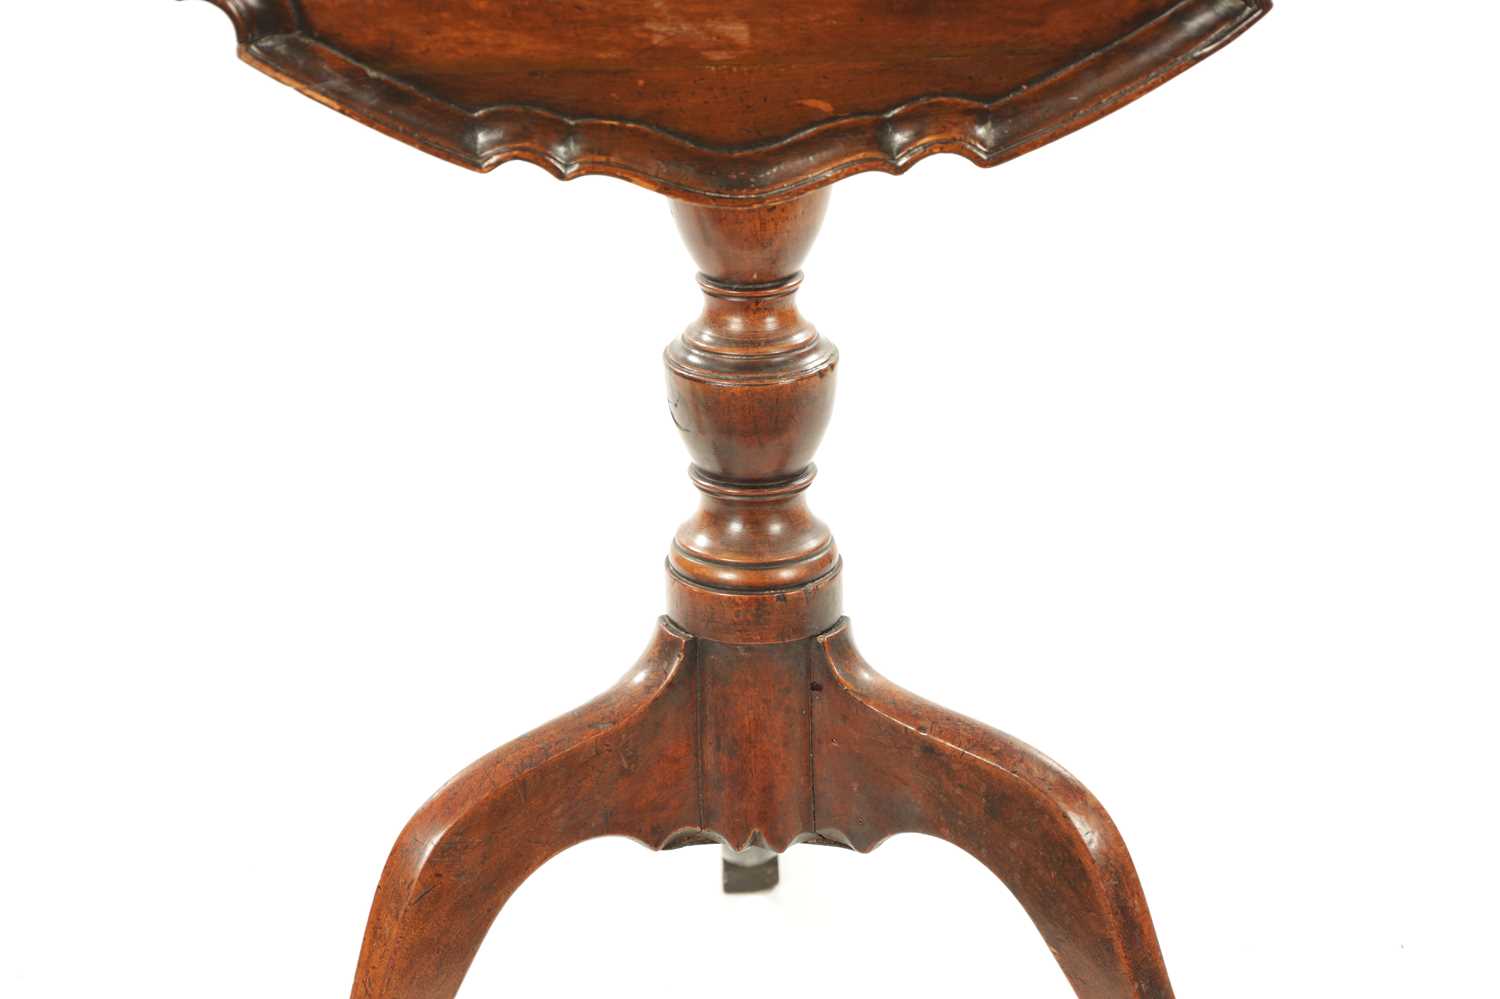 AN 18TH CENTURY COUNTRY MADE MAHOGANY TILT TOP TRIPOD TABLE - Image 3 of 9